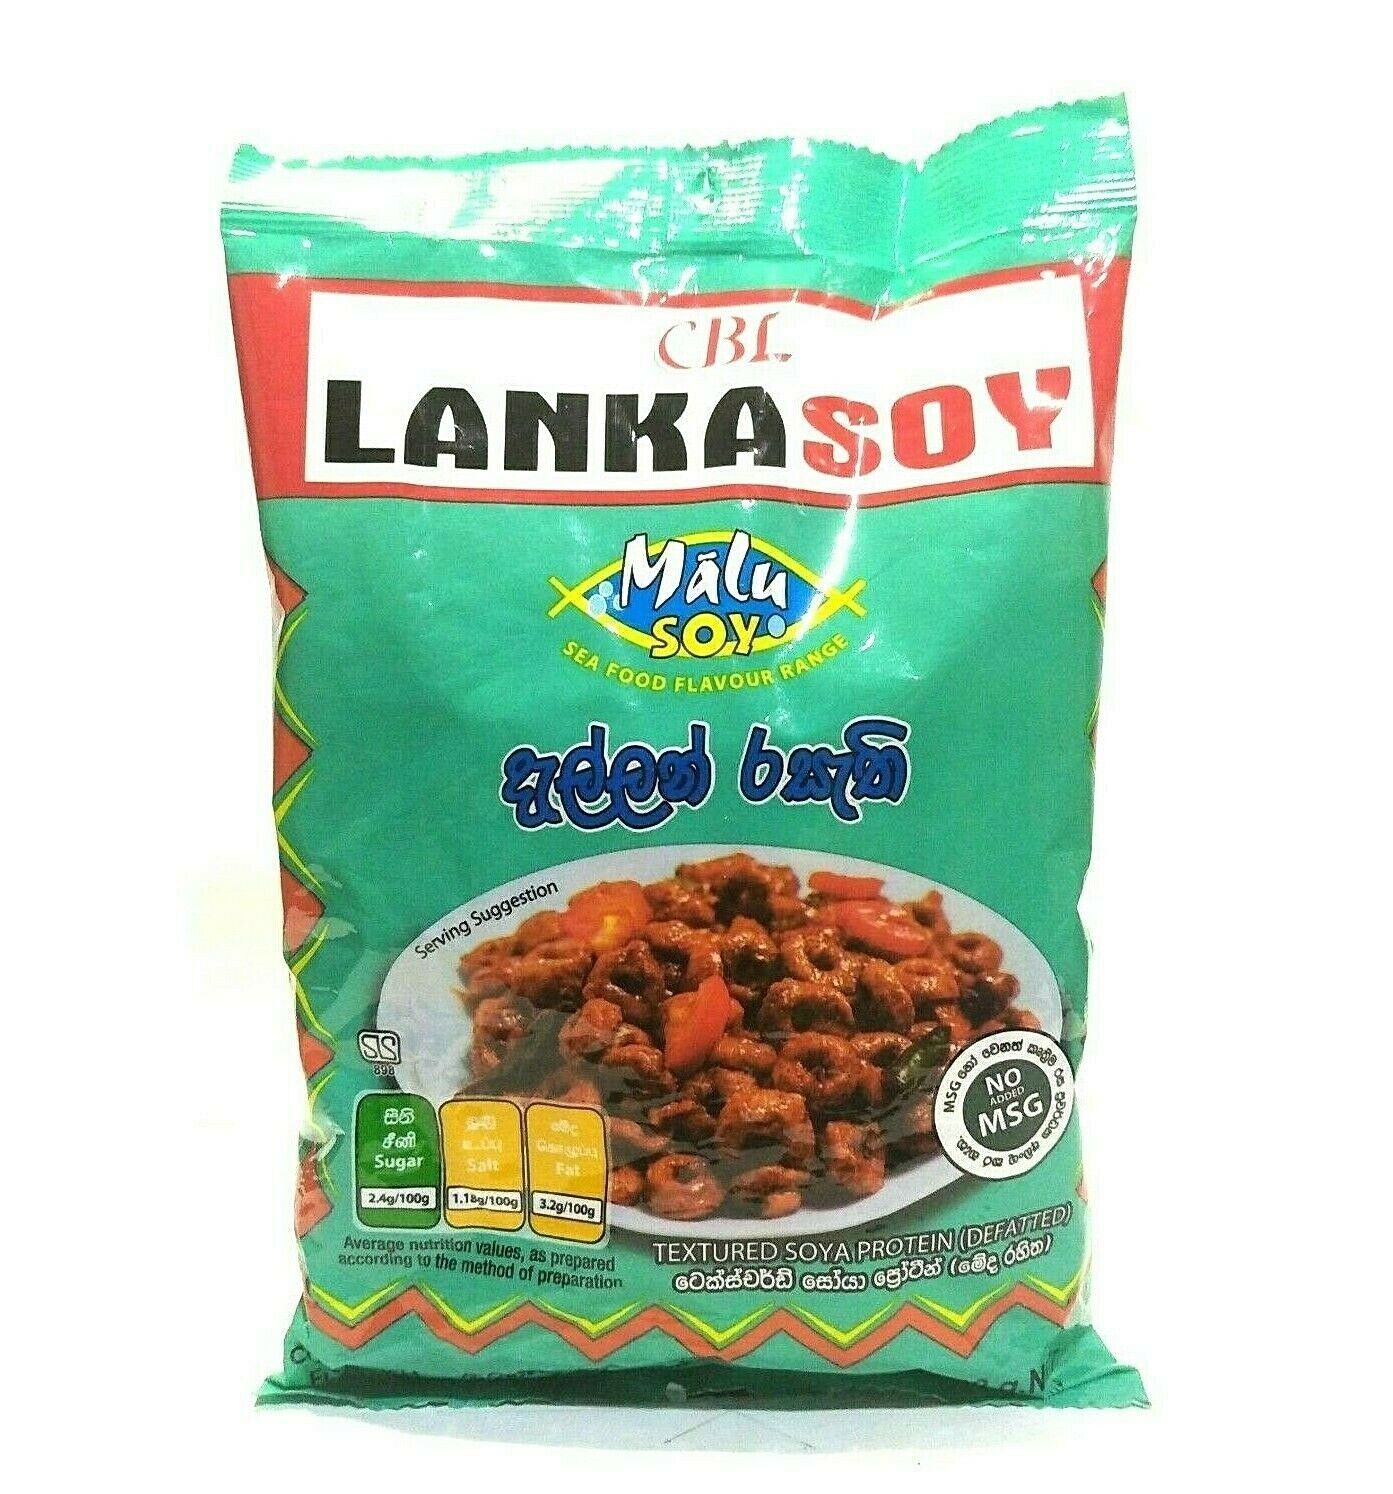 Lanka Soy Malu Soy Cuttlefish Flavored Textured Soya Protein(defatted) 90g New